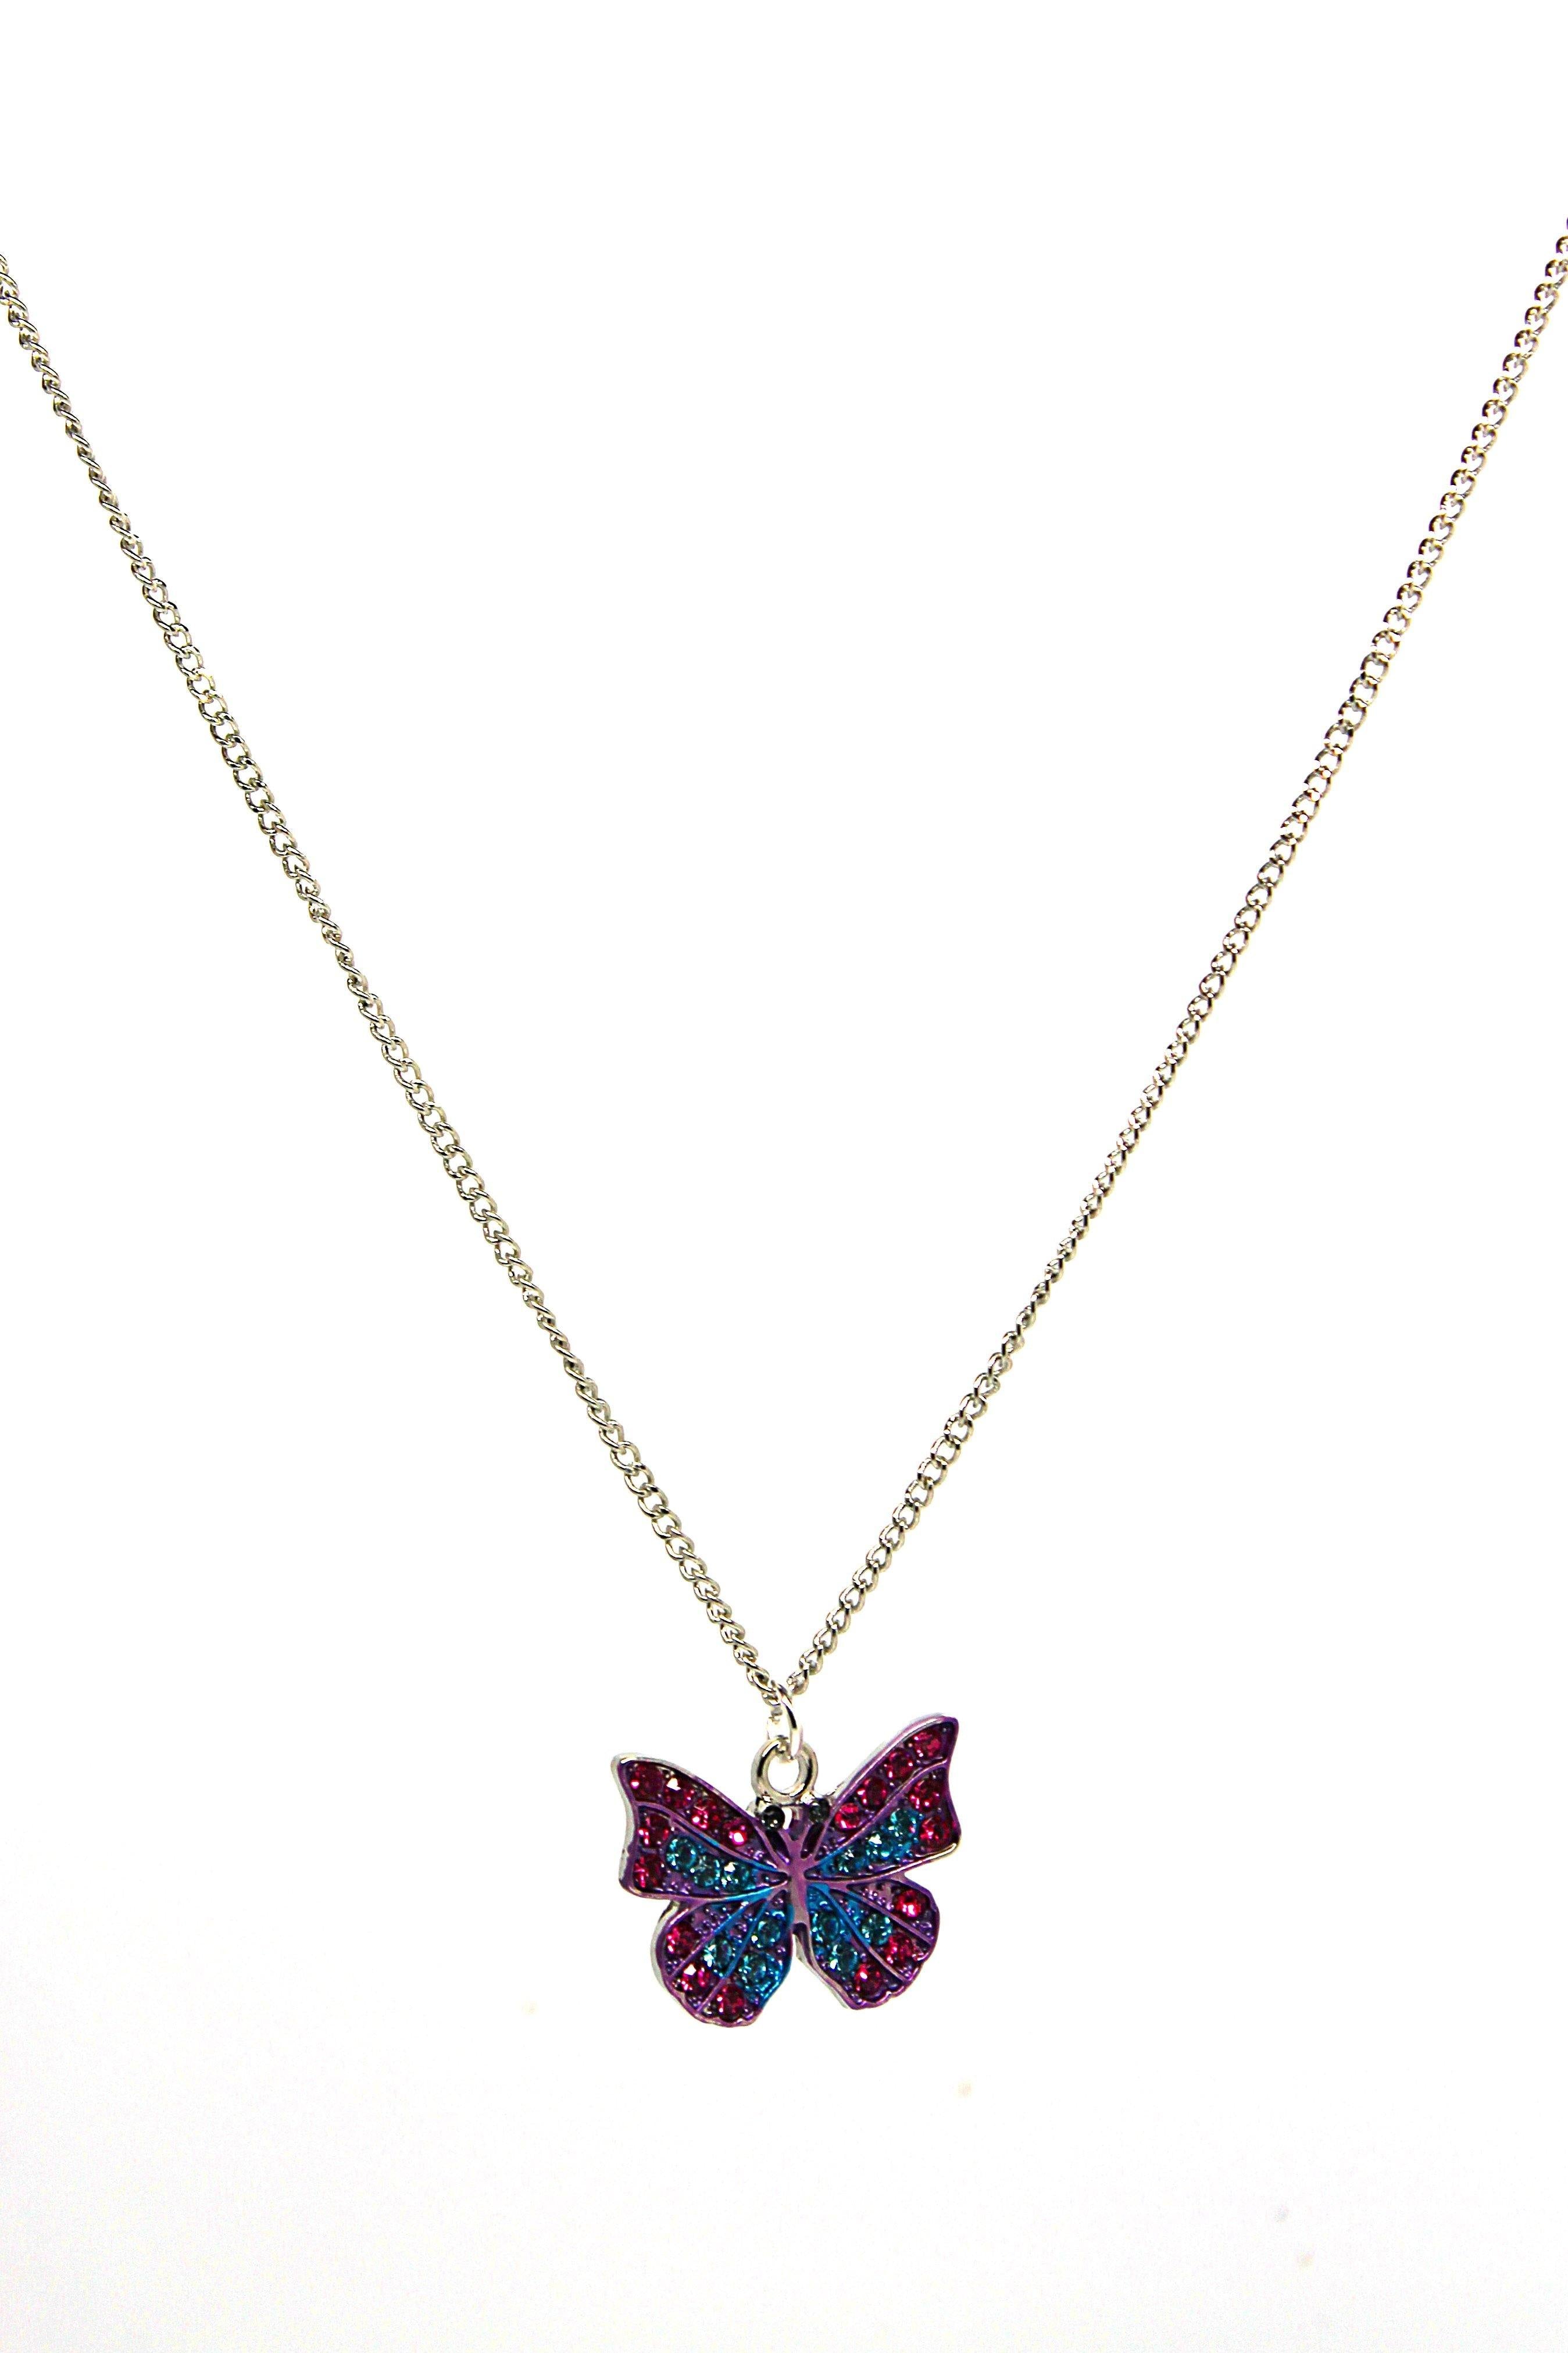 Butterfly Pink & Blue Necklace - Wildtouch - Wildtouch